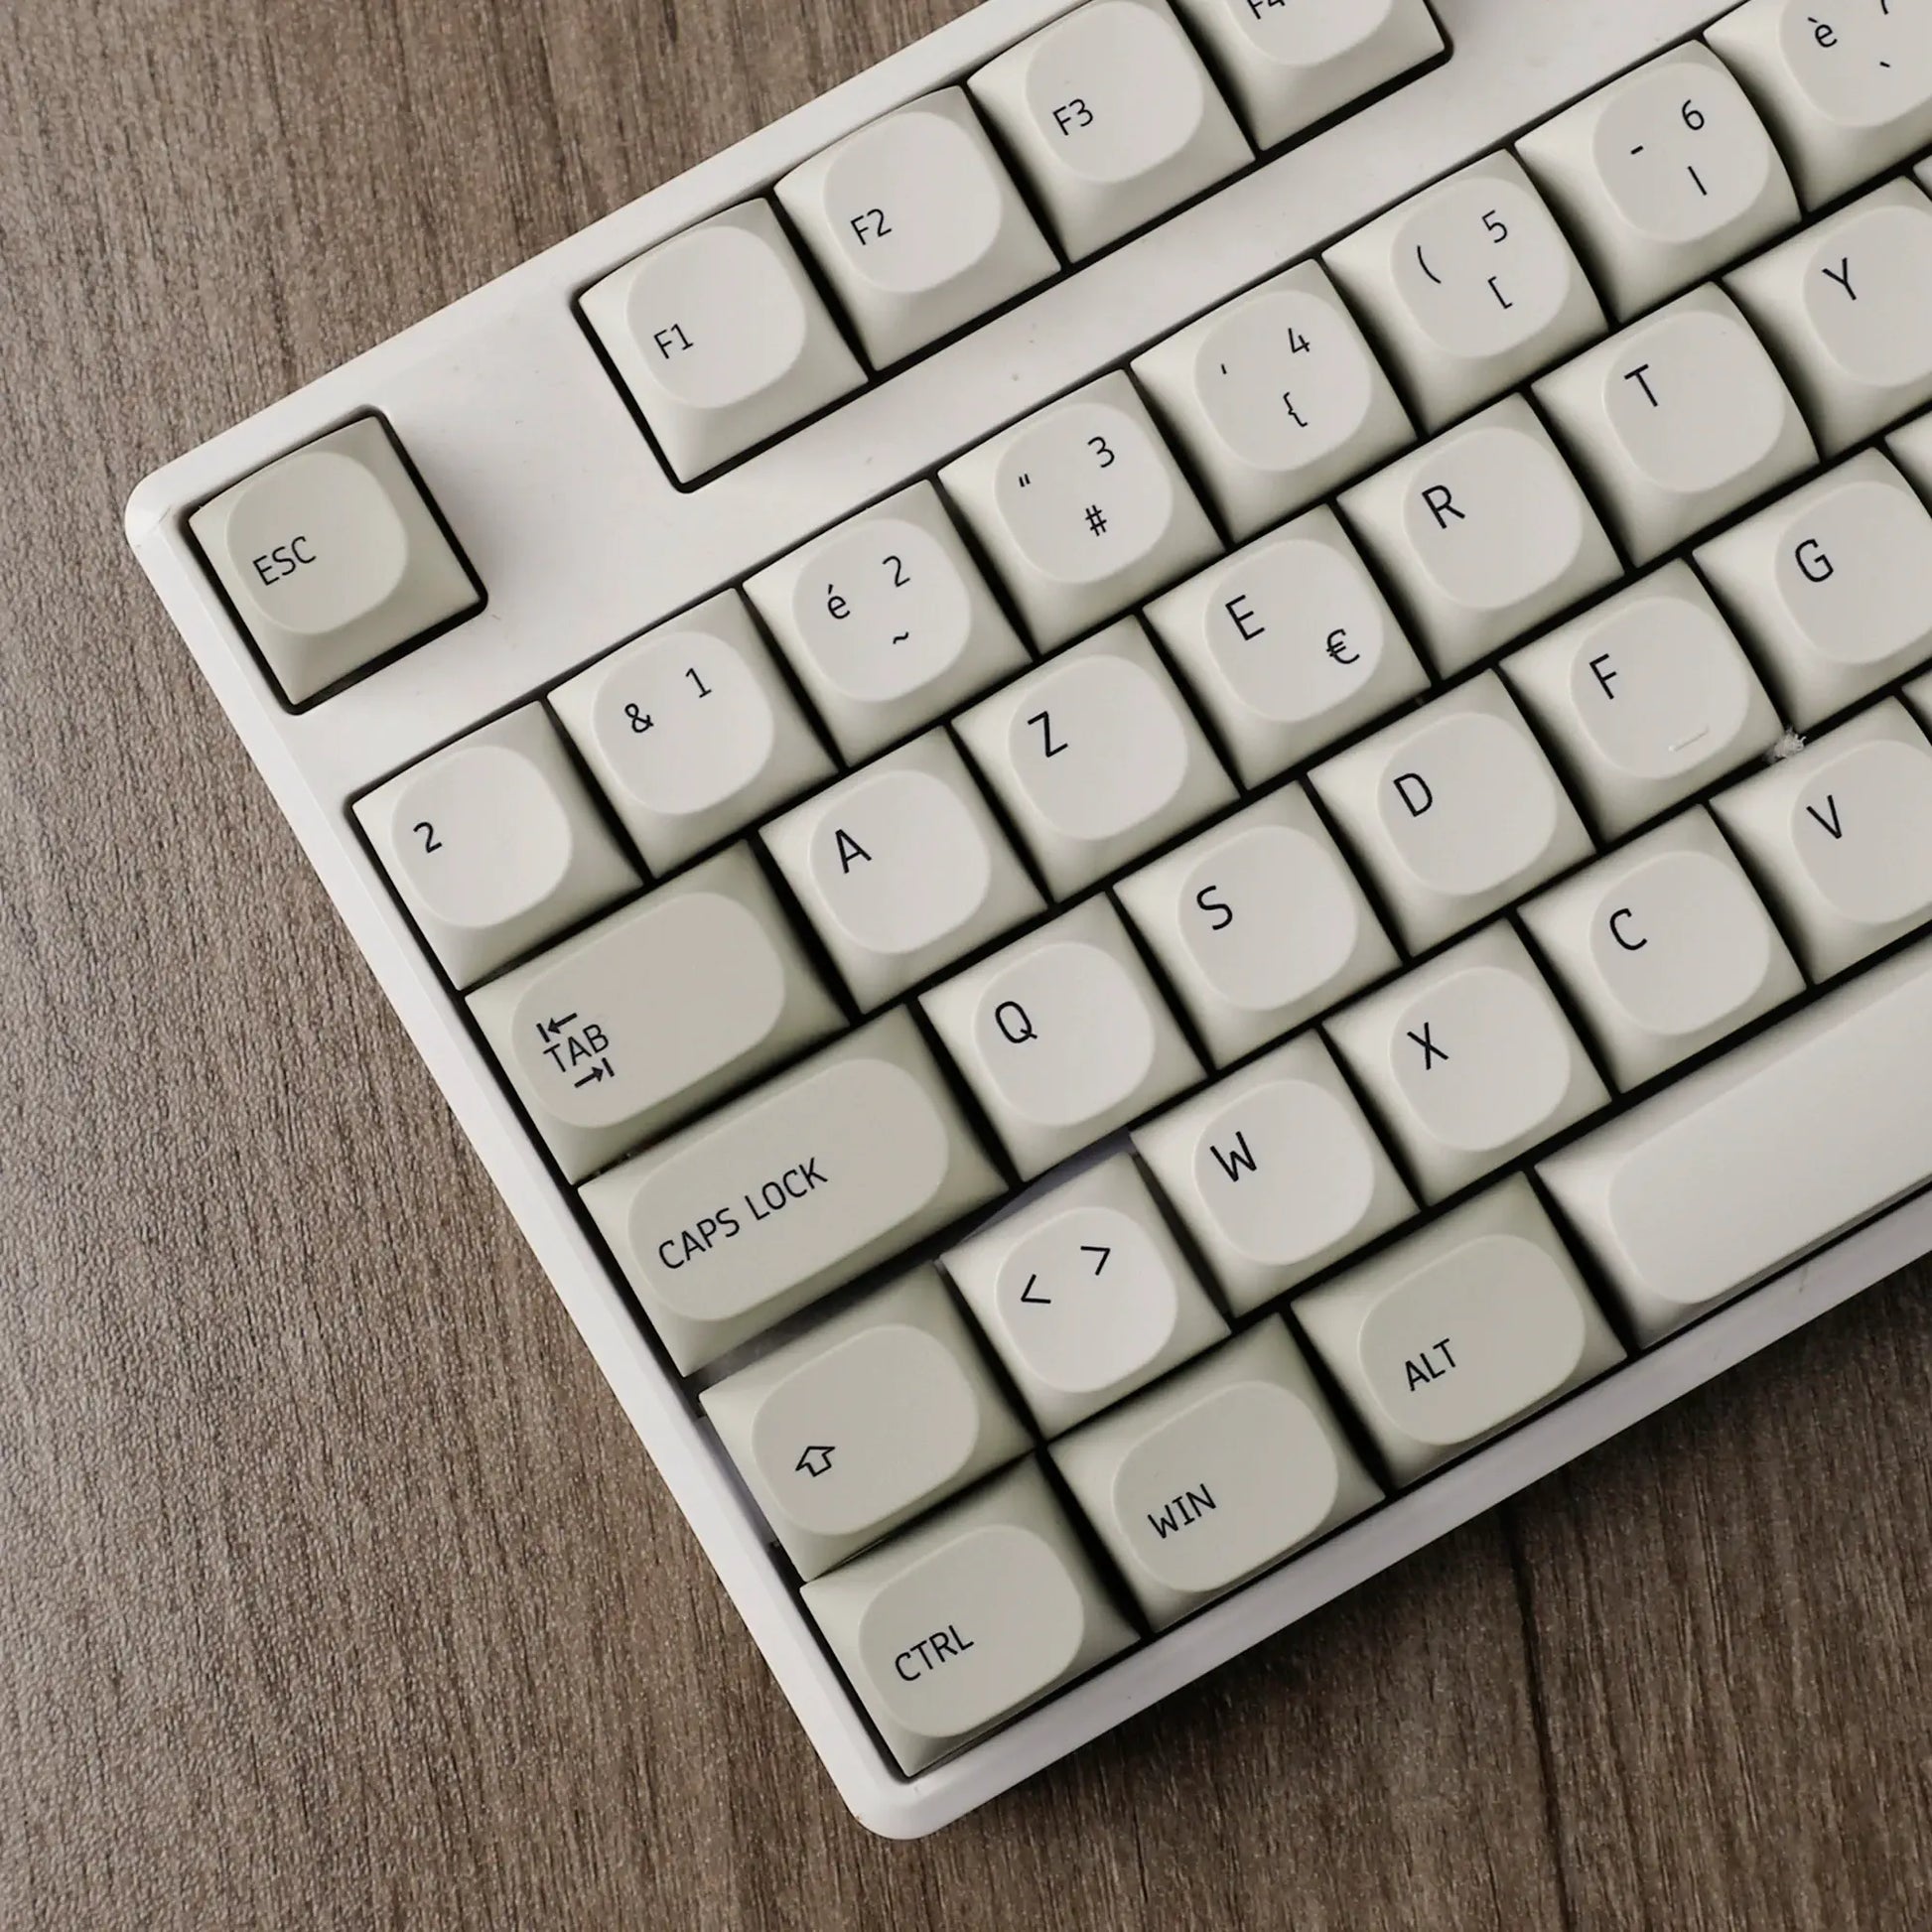 Keycaps Azerty French Layout Vintage Gris sur une table